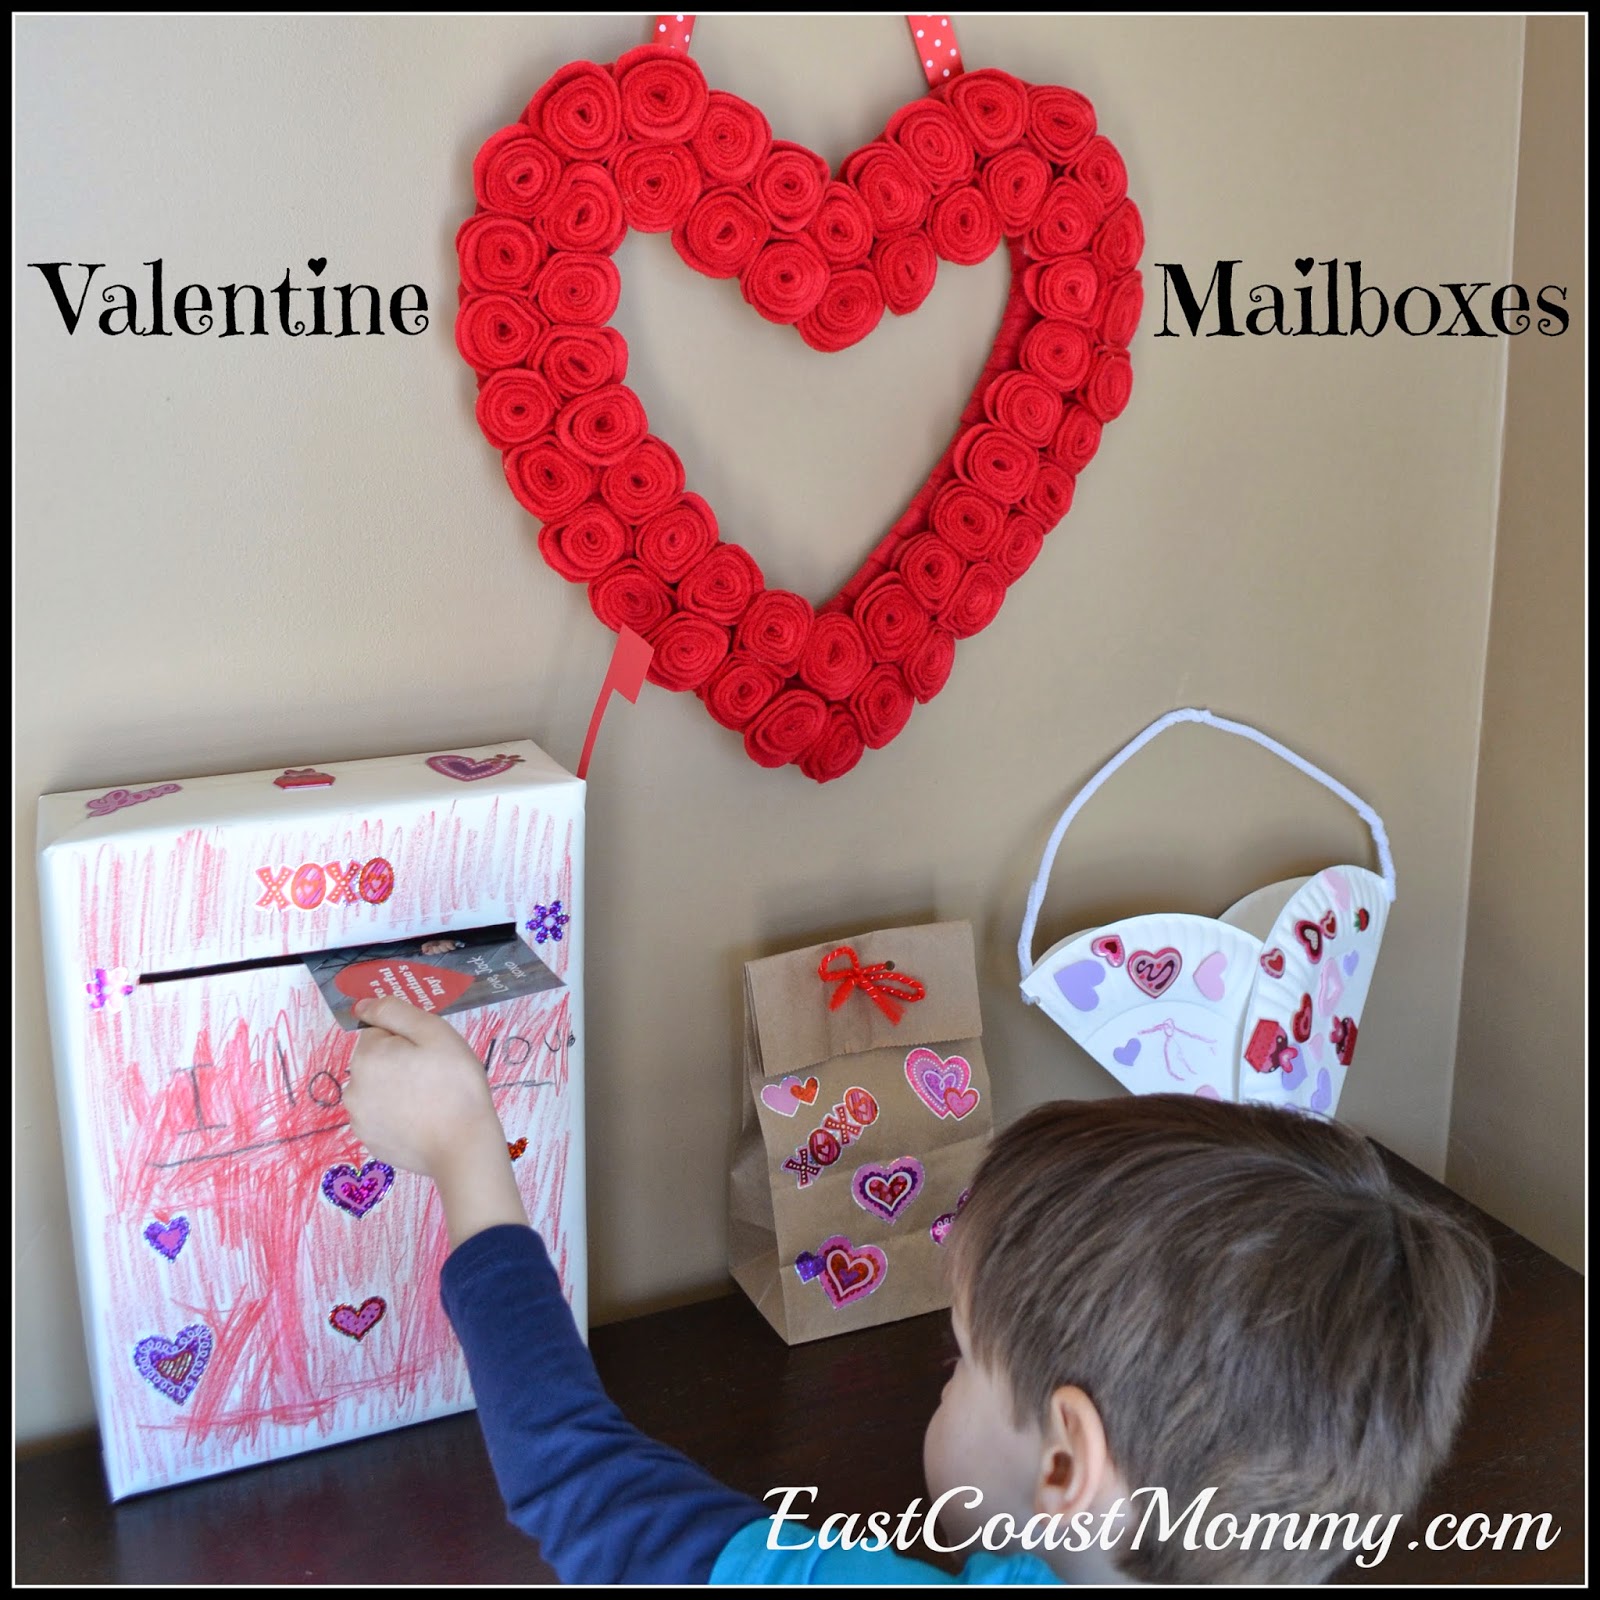 East Coast Mommy: Valentine Mailboxes Crafts for Kids